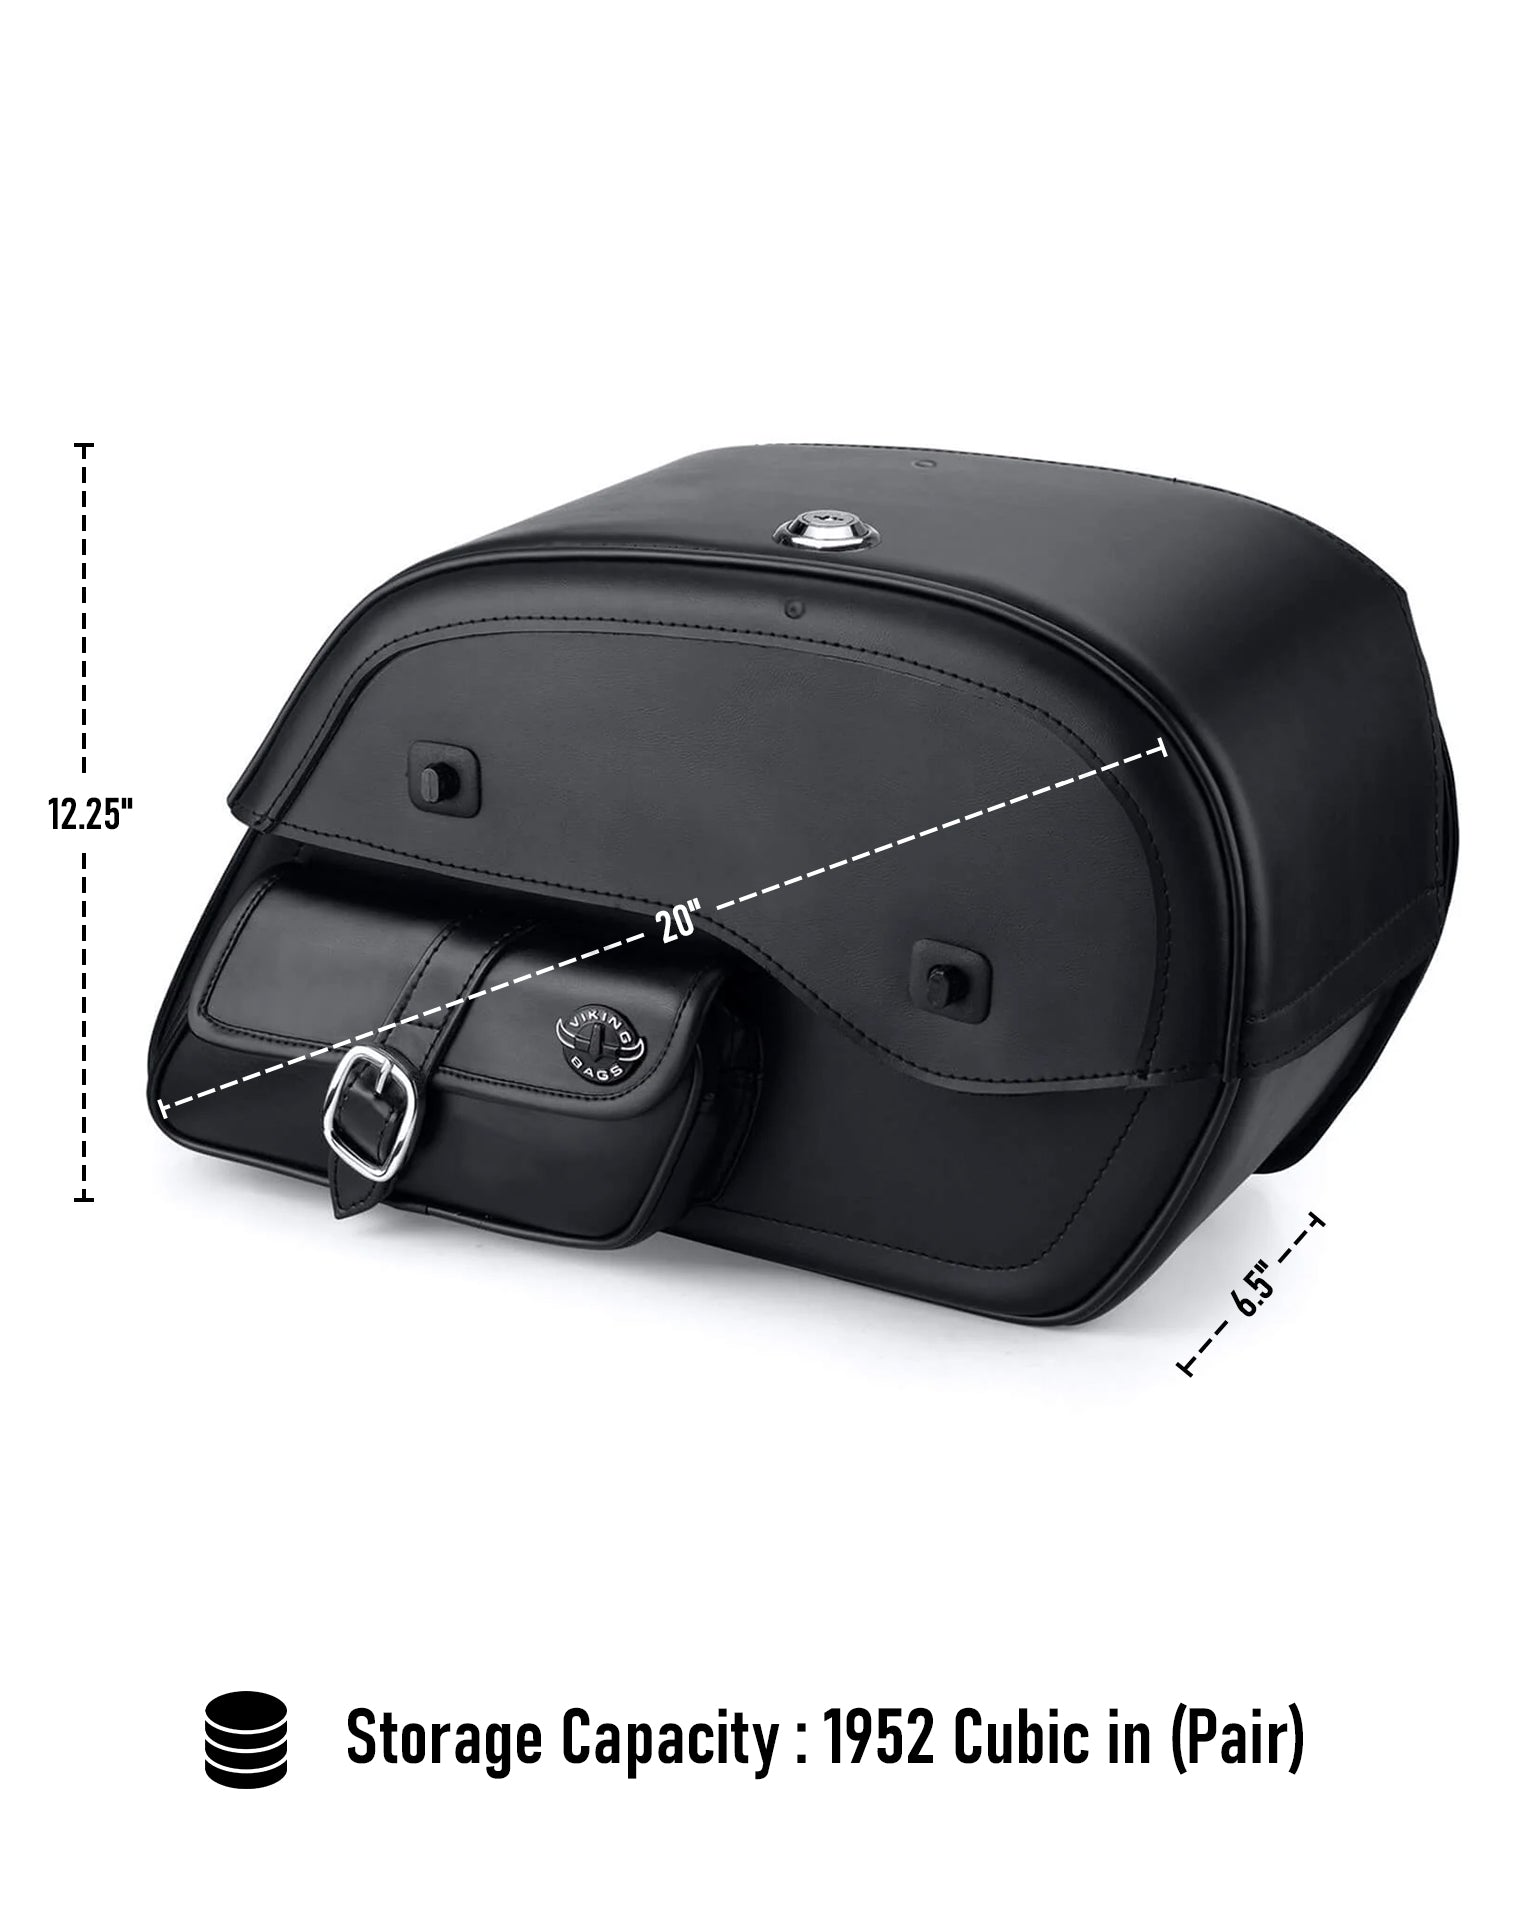 Viking Essential Side Pocket Large Suzuki Intruder 1500 Vl1500 Leather Motorcycle Saddlebags Can Store Your Ridings Gears